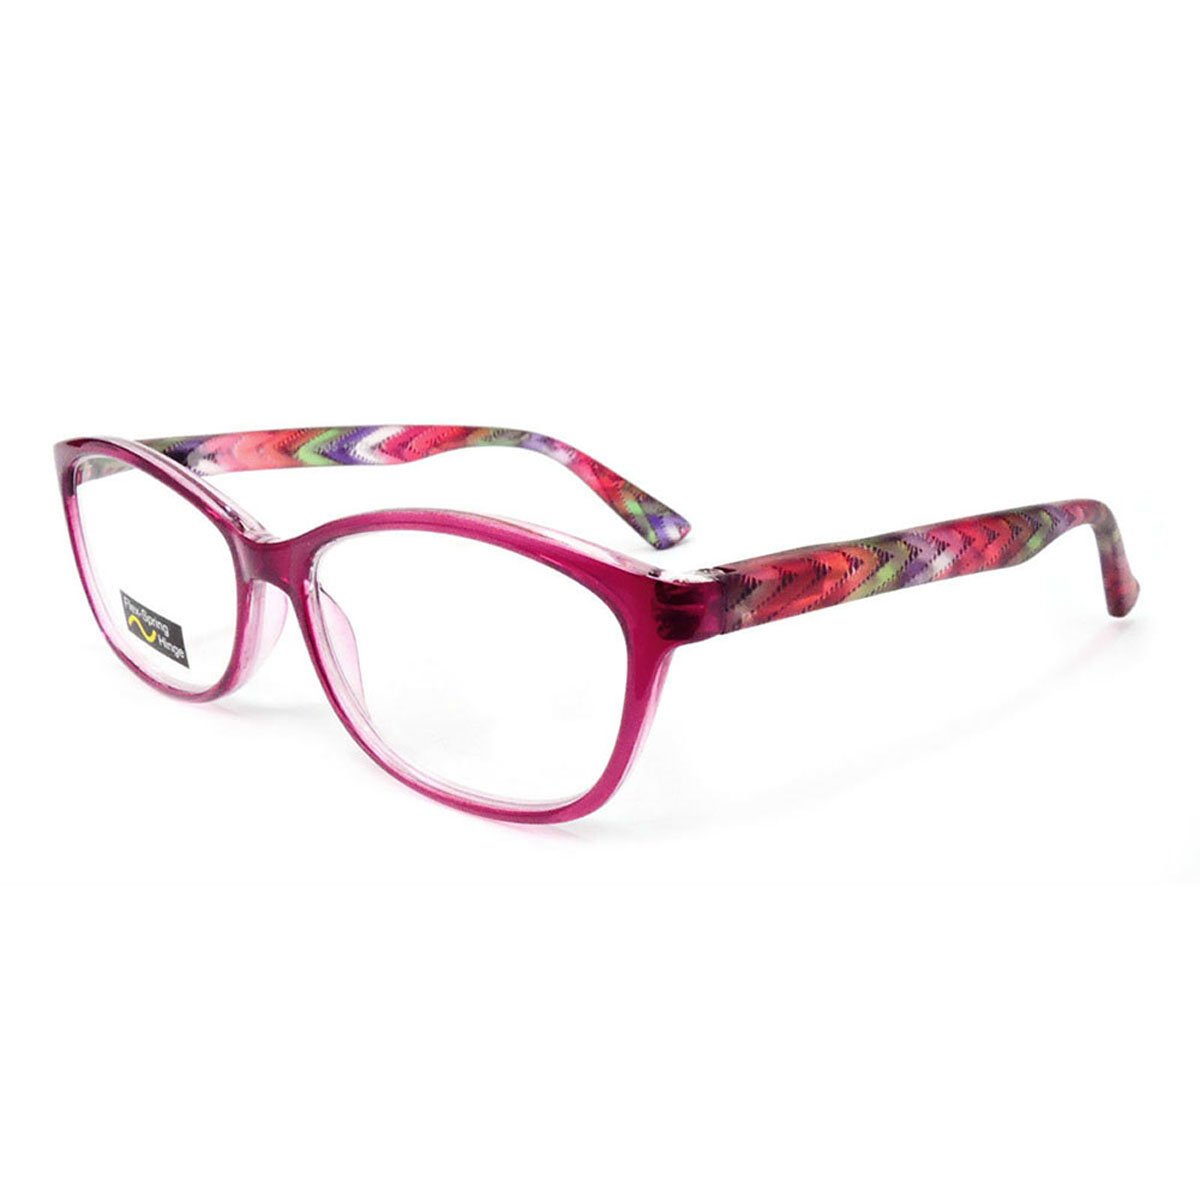 Classic Frame Reading Glasses Colorful Arms Retro Vintage Style - Black, +2.75